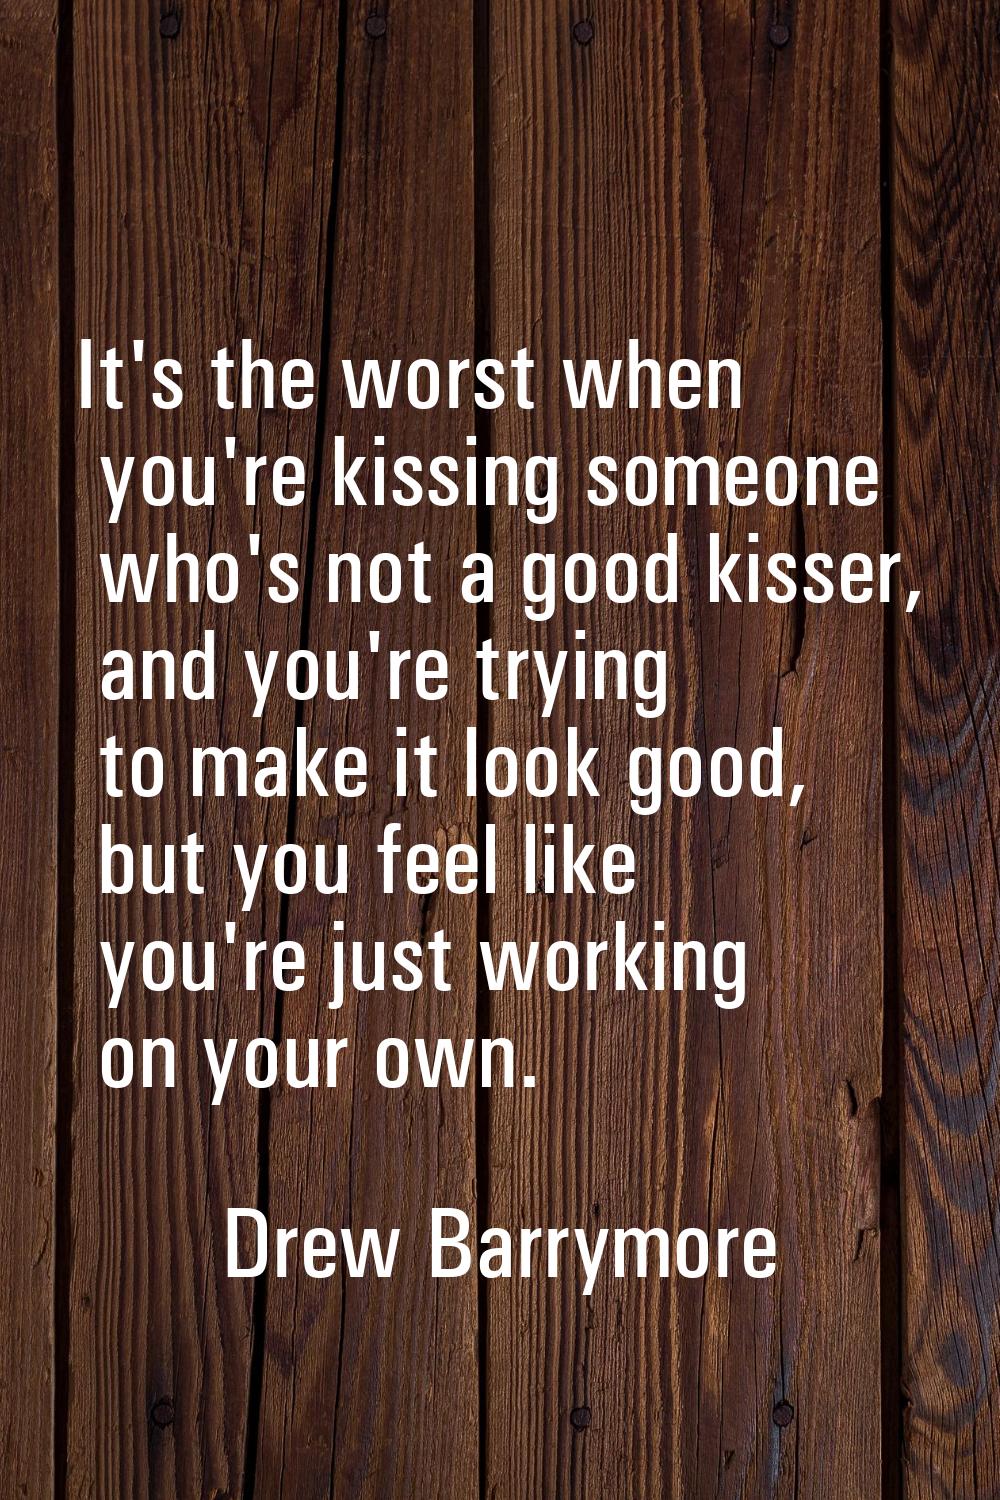 It's the worst when you're kissing someone who's not a good kisser, and you're trying to make it lo